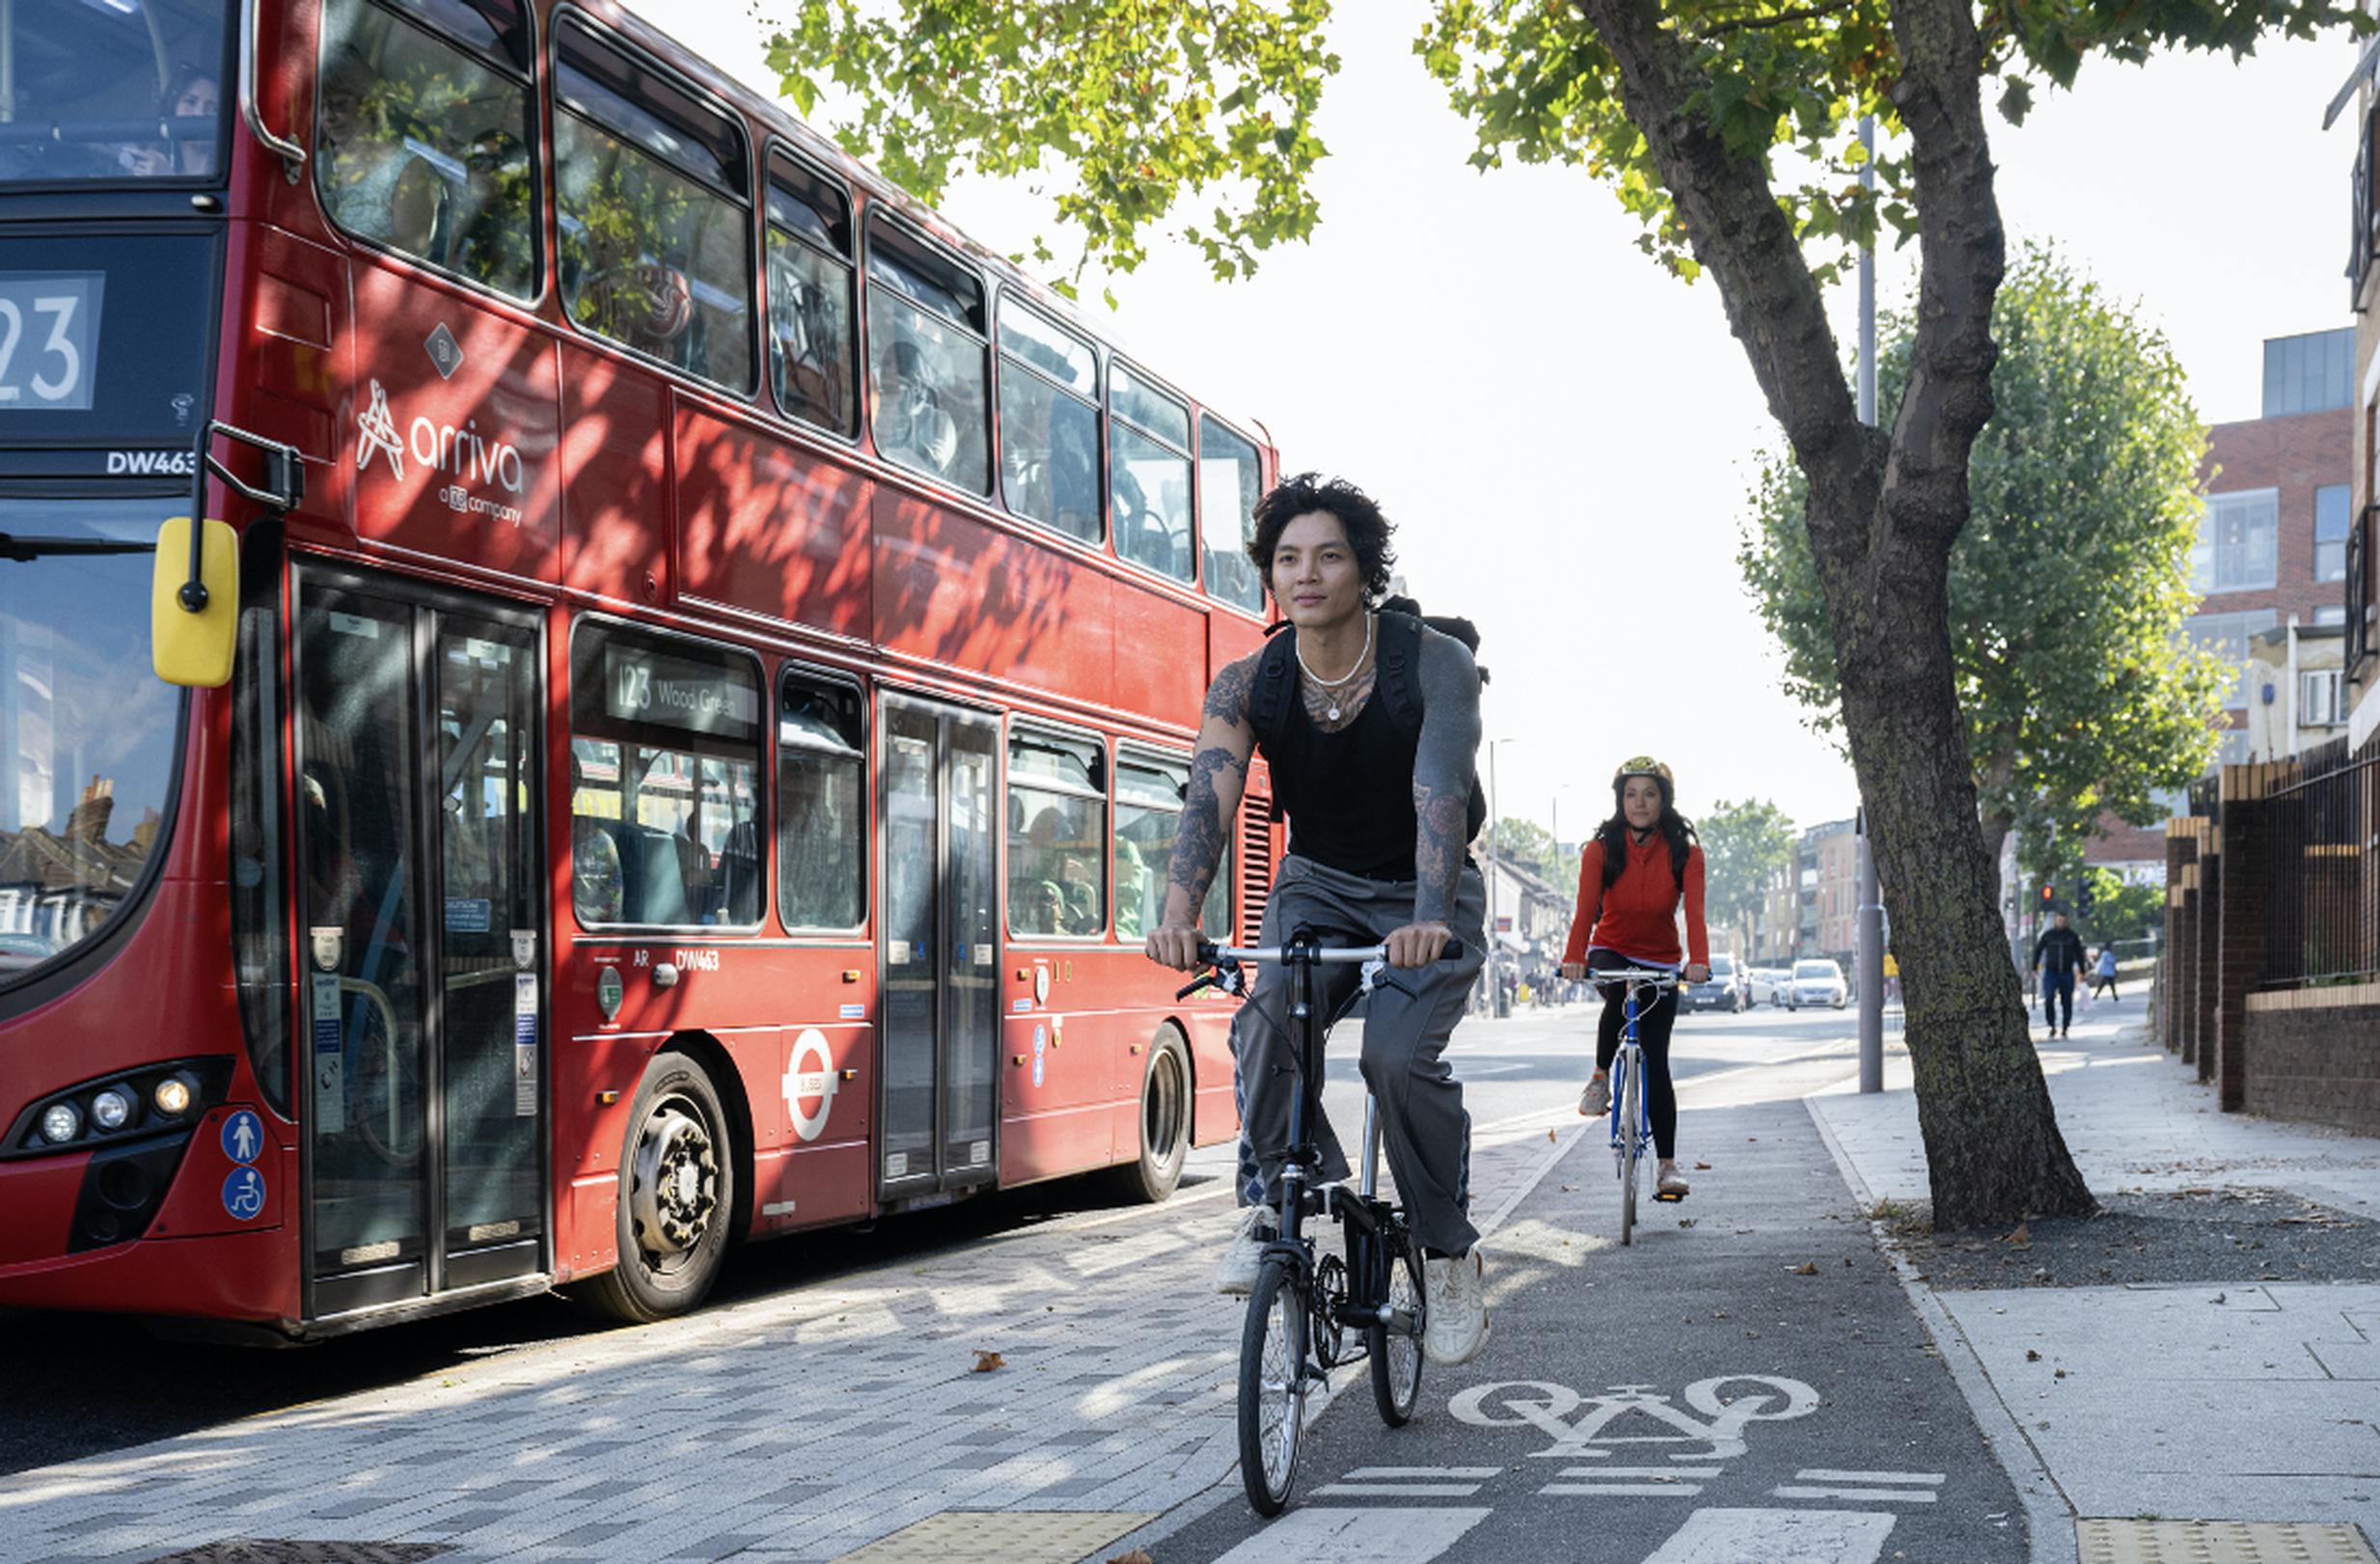 TfL and its innovation partners will work together to create new concepts and products to help improve how people move around and to make the city a better place to live